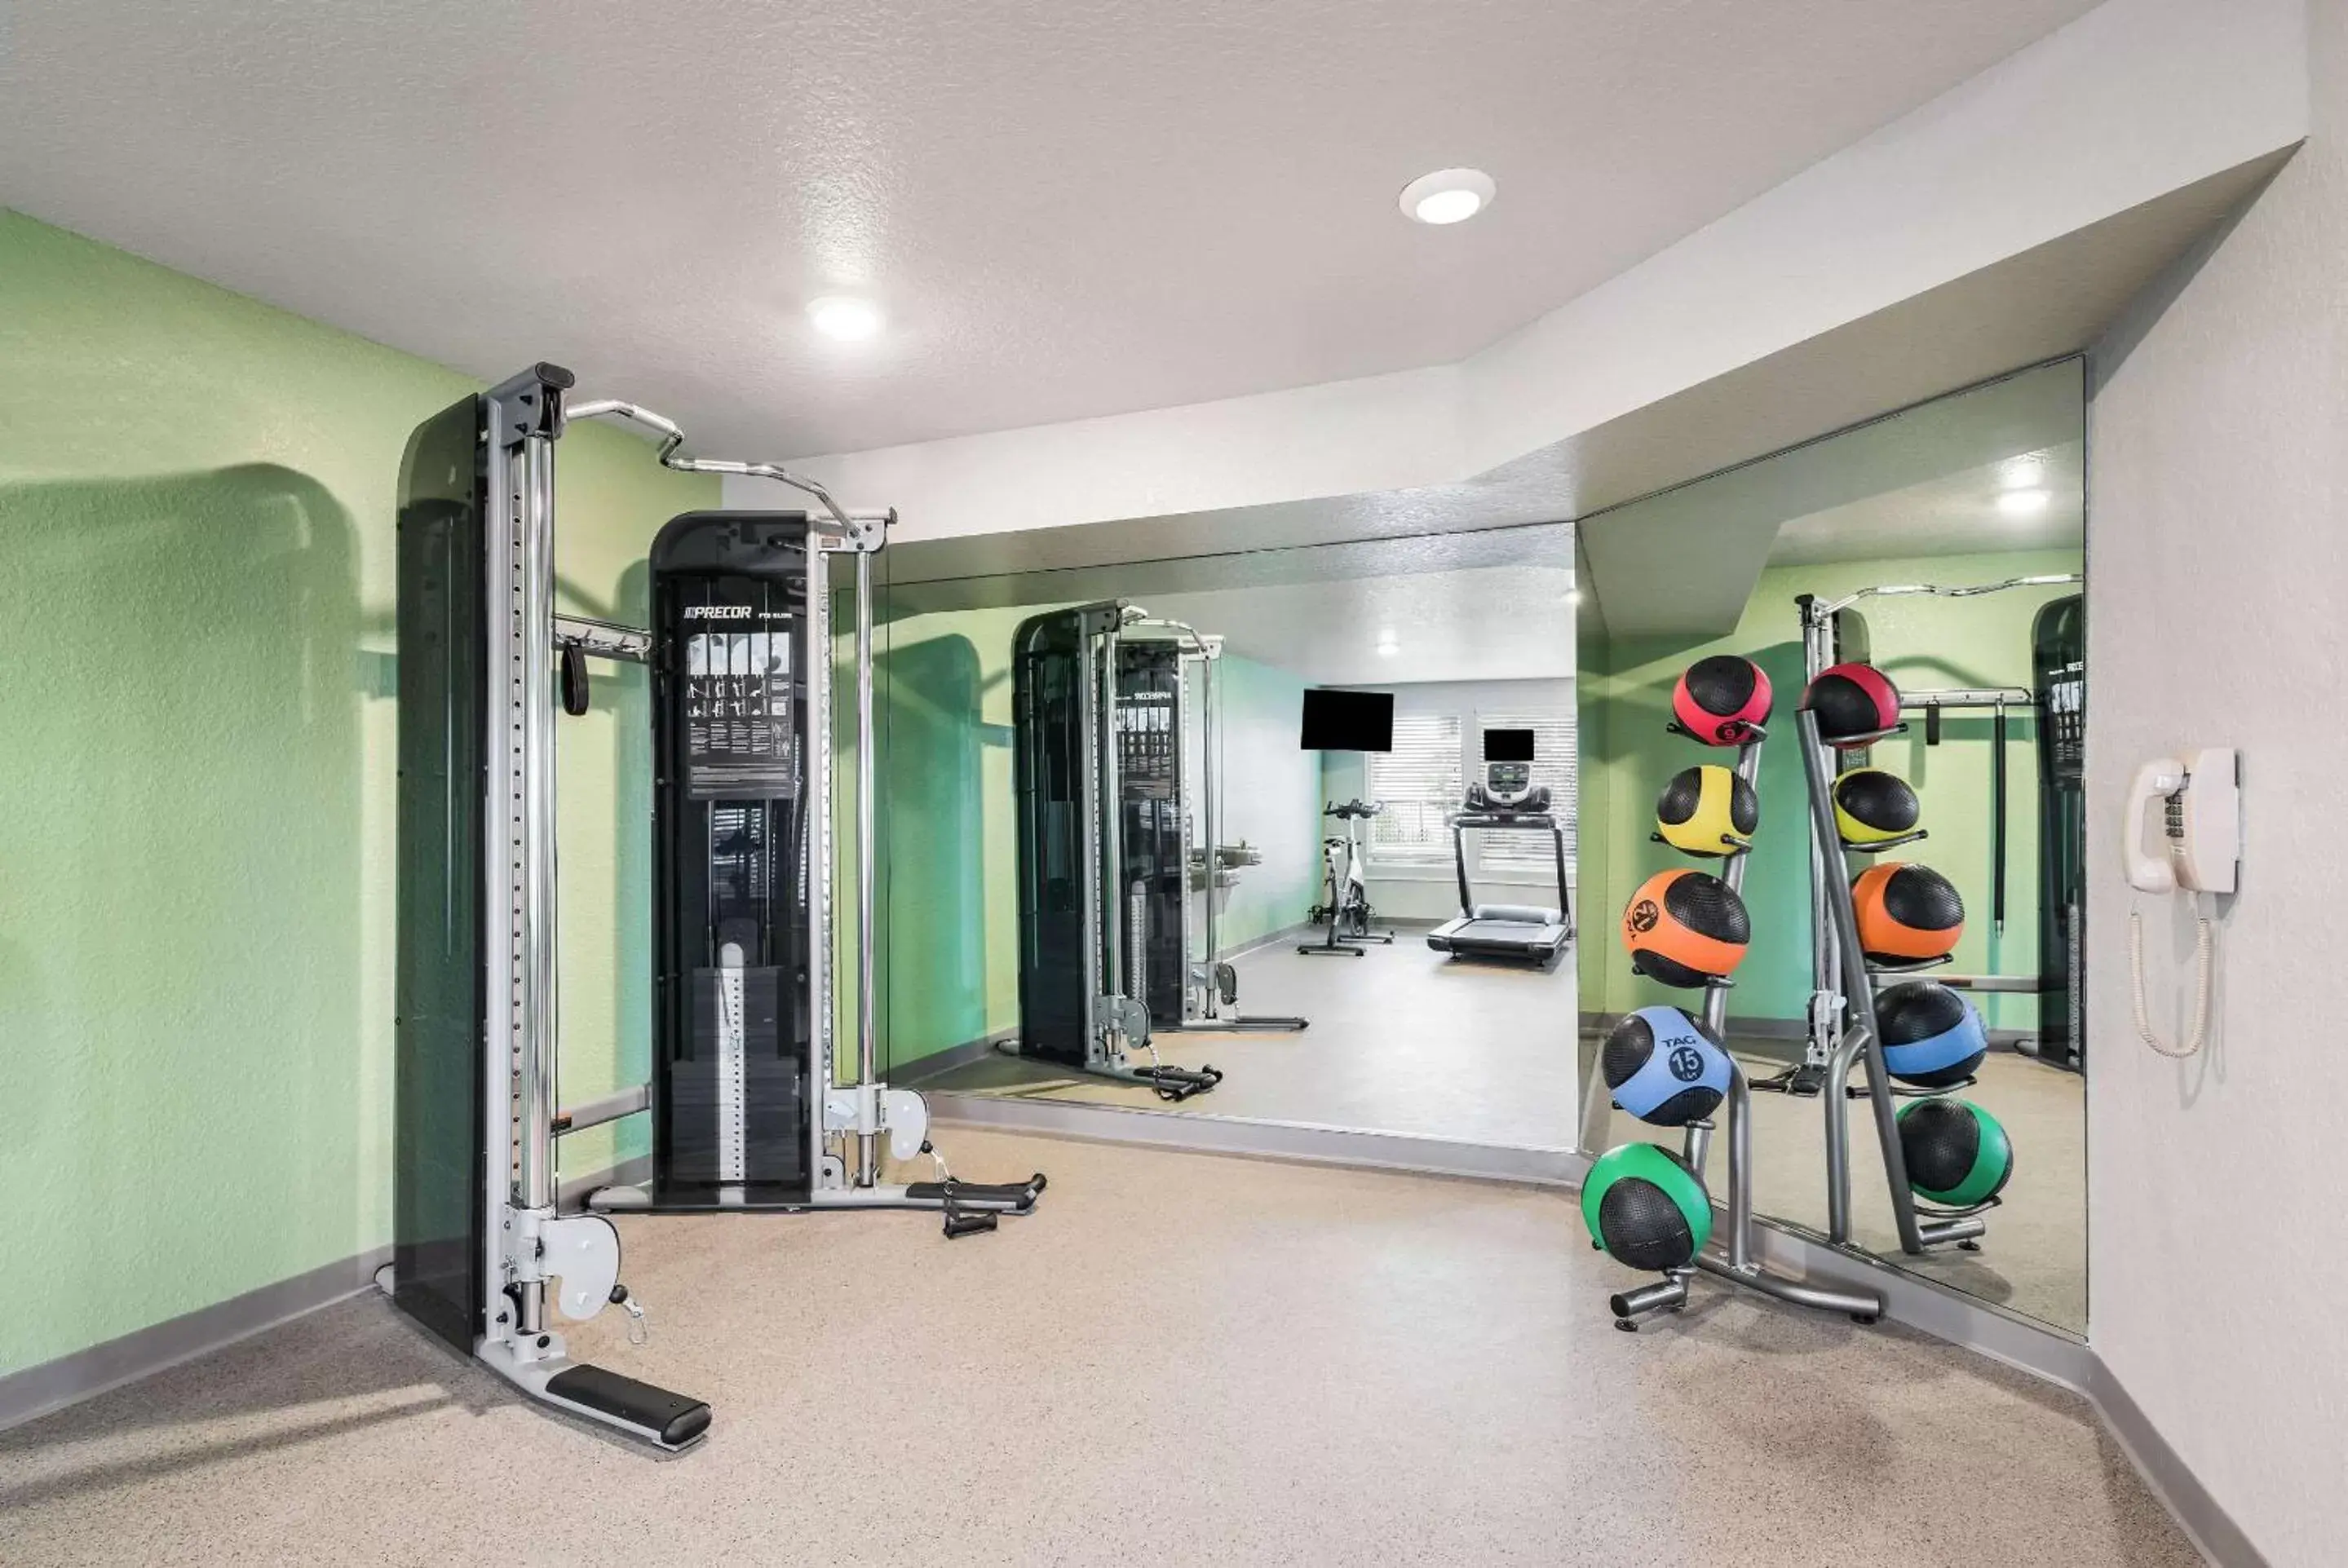 Fitness centre/facilities, Fitness Center/Facilities in WoodSpring Suites Davenport FL